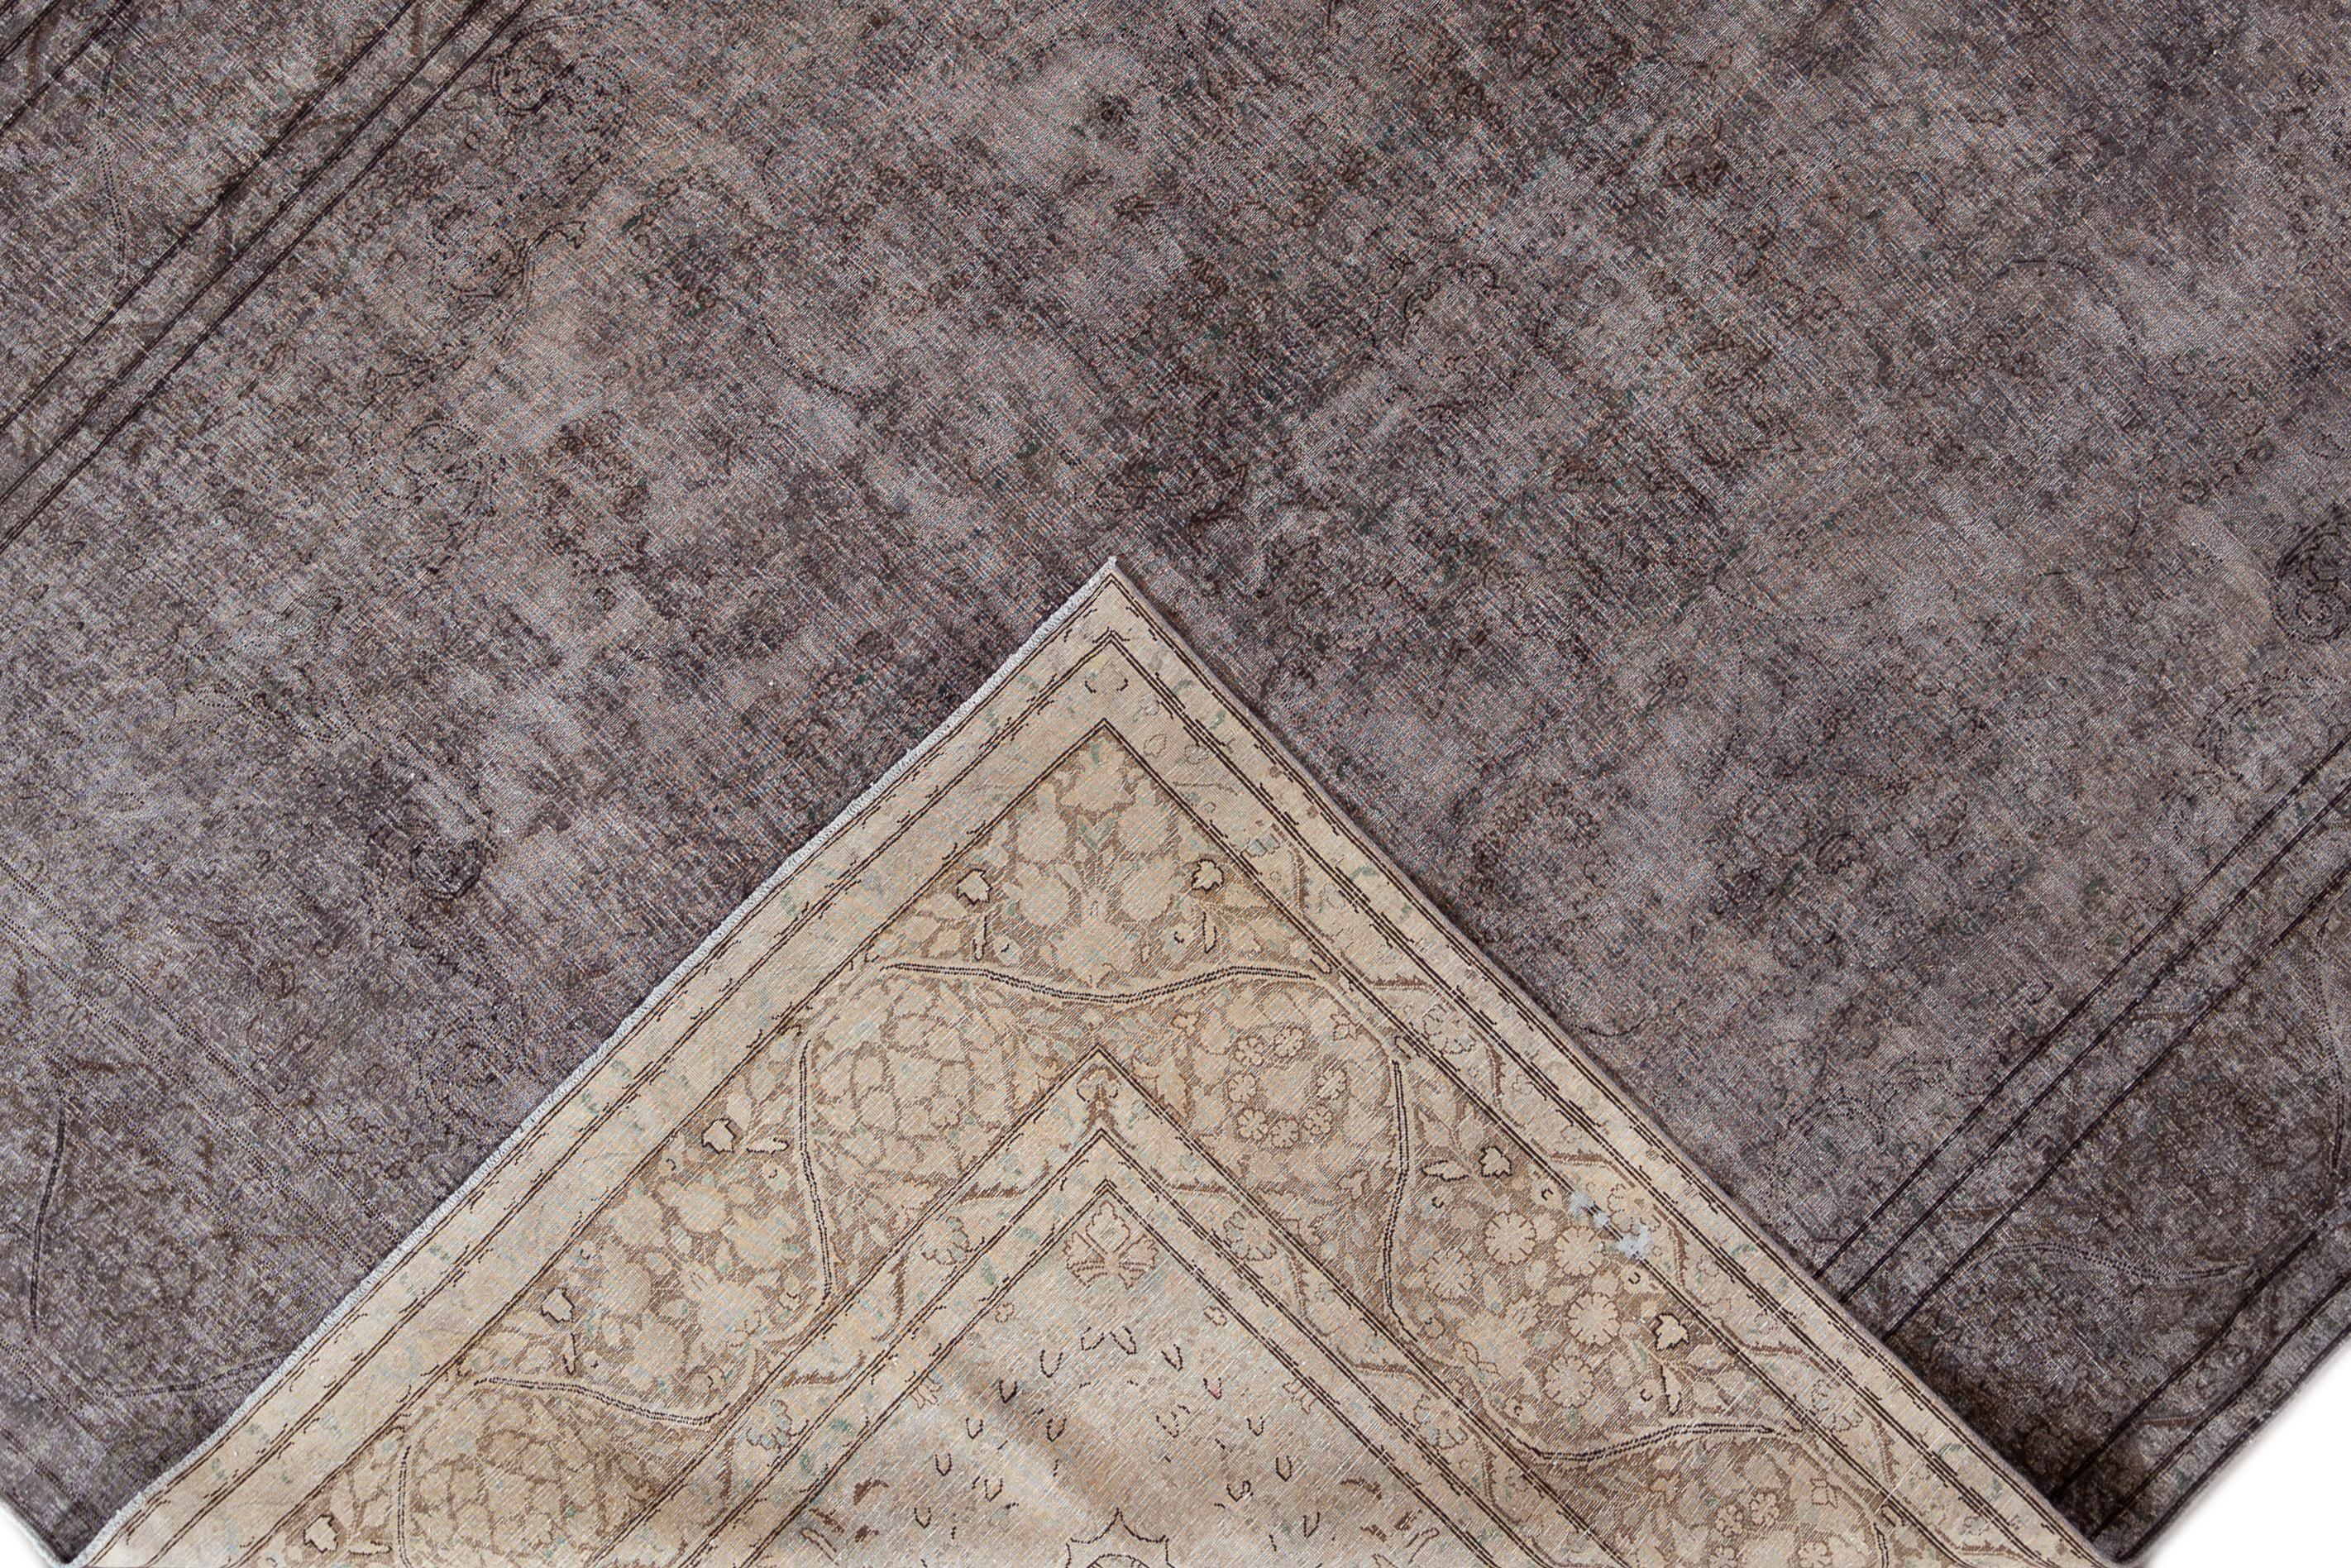 Beautiful vintage overdyed hand knotted wool rug with a gray field. This overdyed rug has brown accents in an all-over distressed floral medallion design.

This rug measures 9' 8